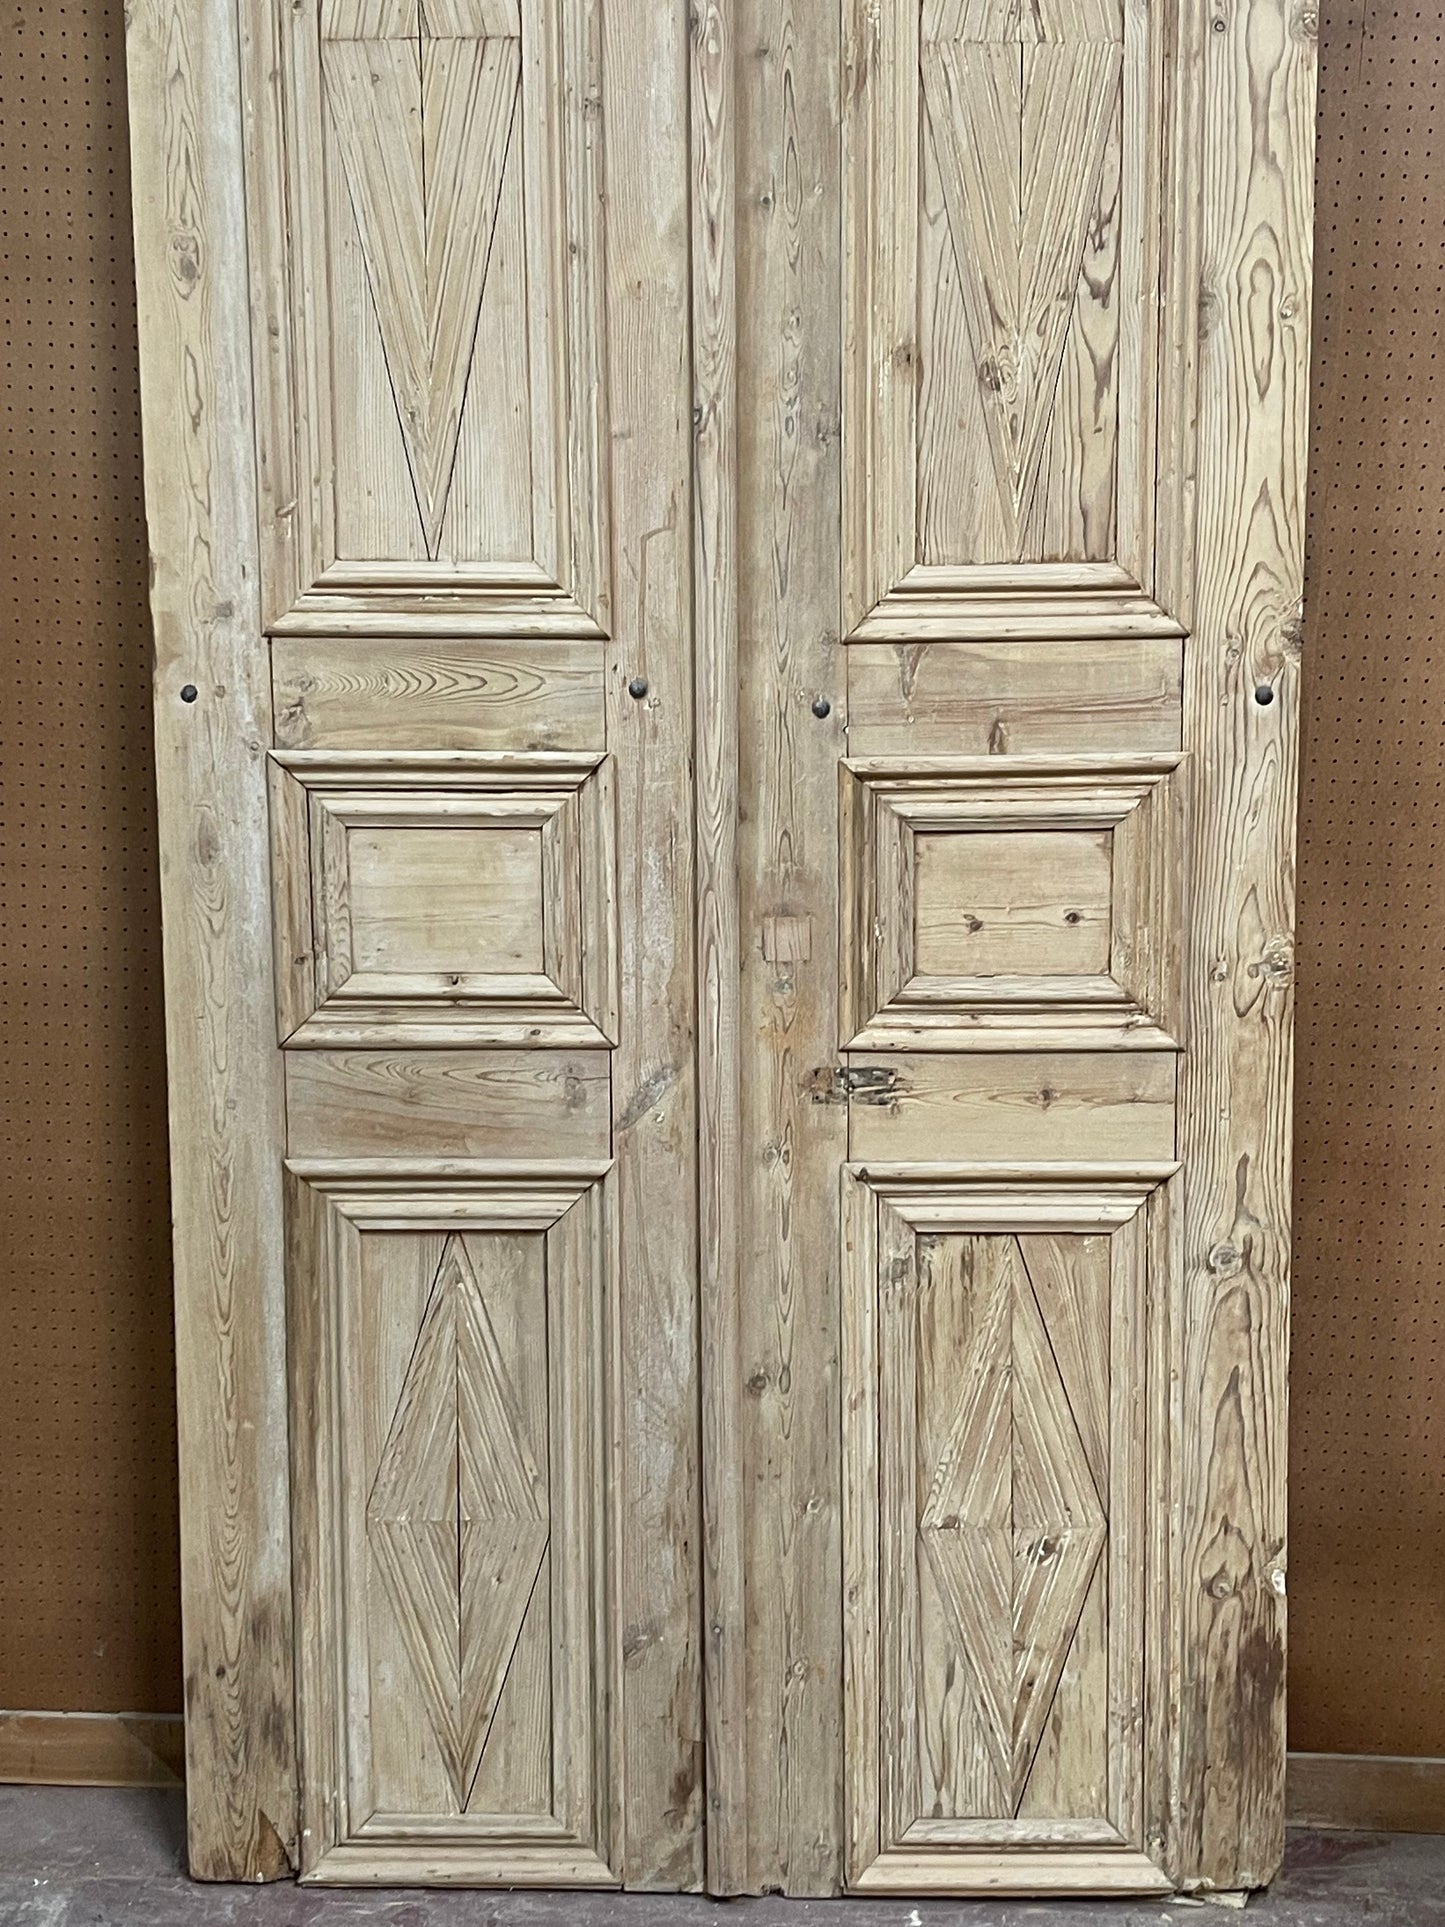 Antique  French Panel Door with Carving  (138.25x53.5)  E999